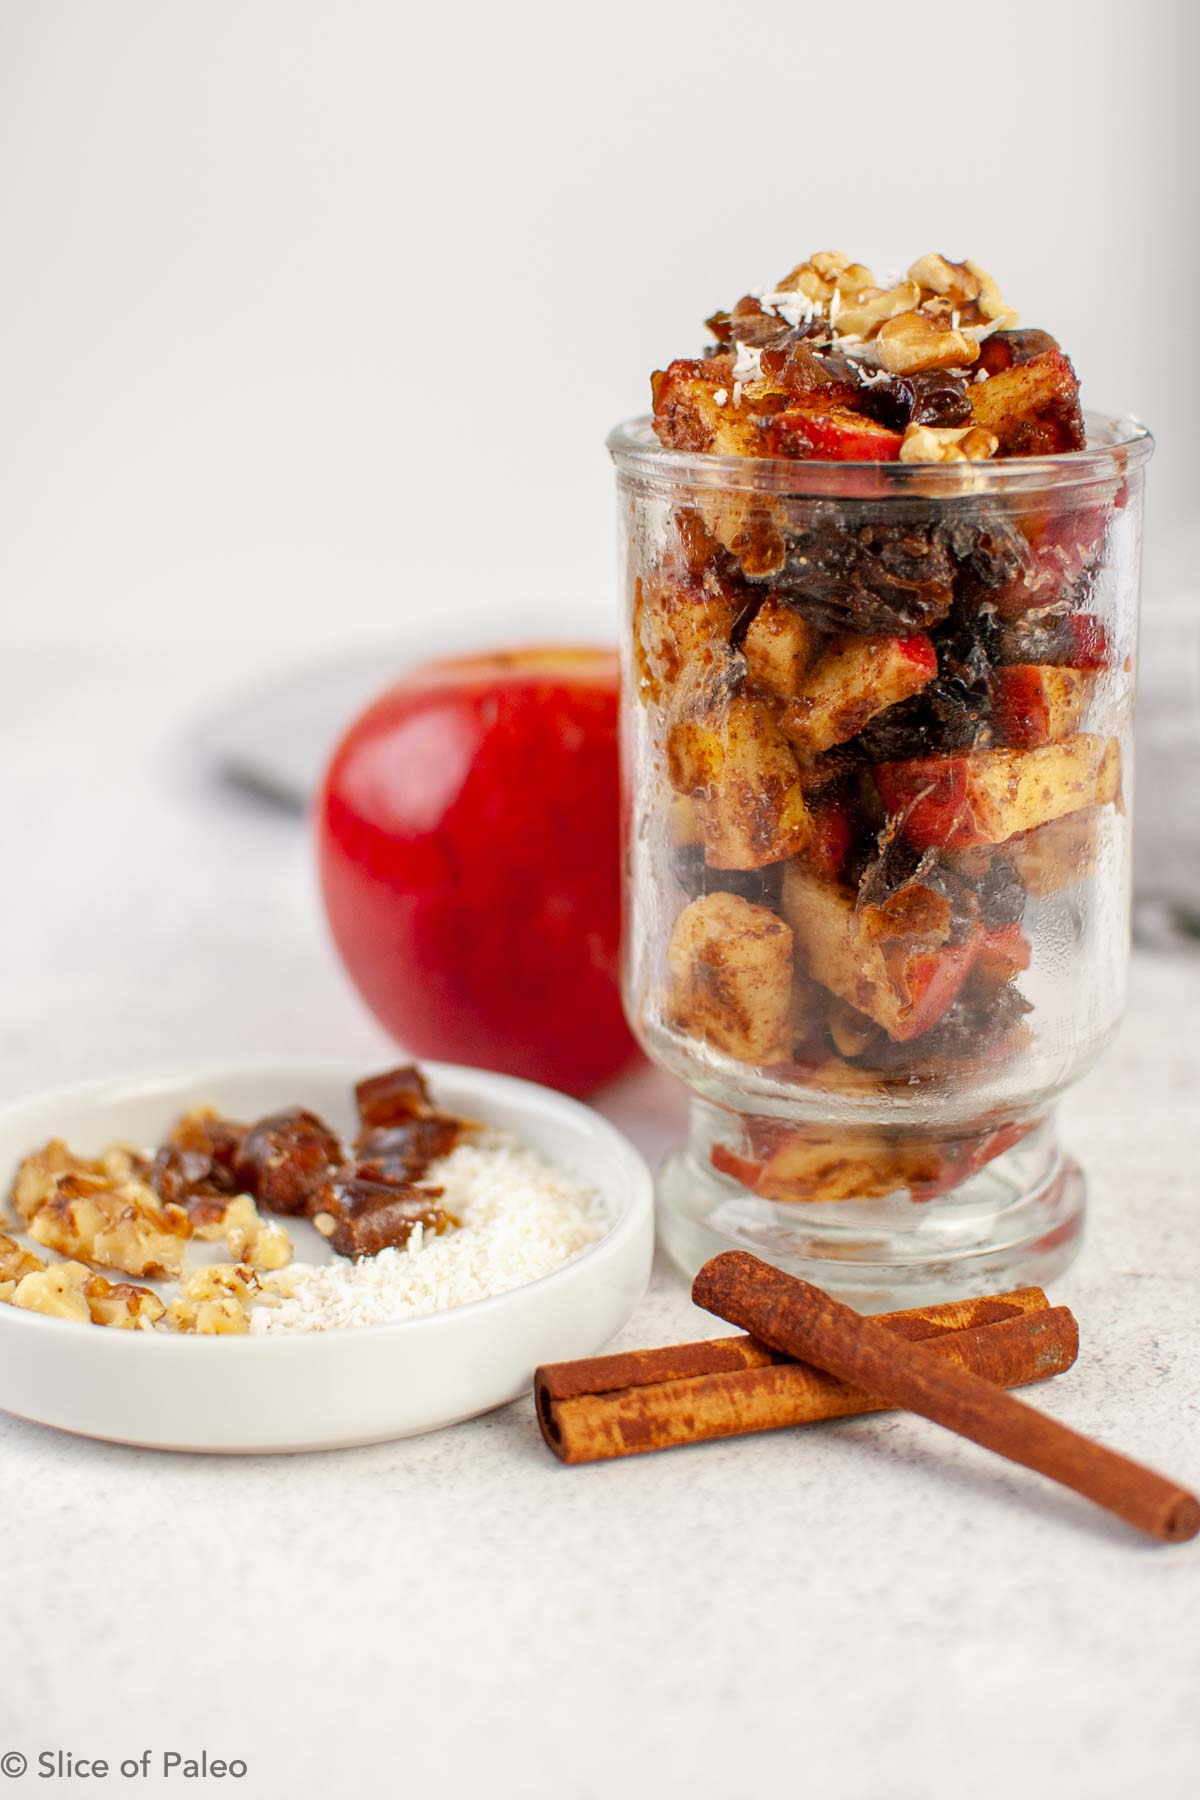 Apple Raisin Almond Butter Compote served in a clear glass